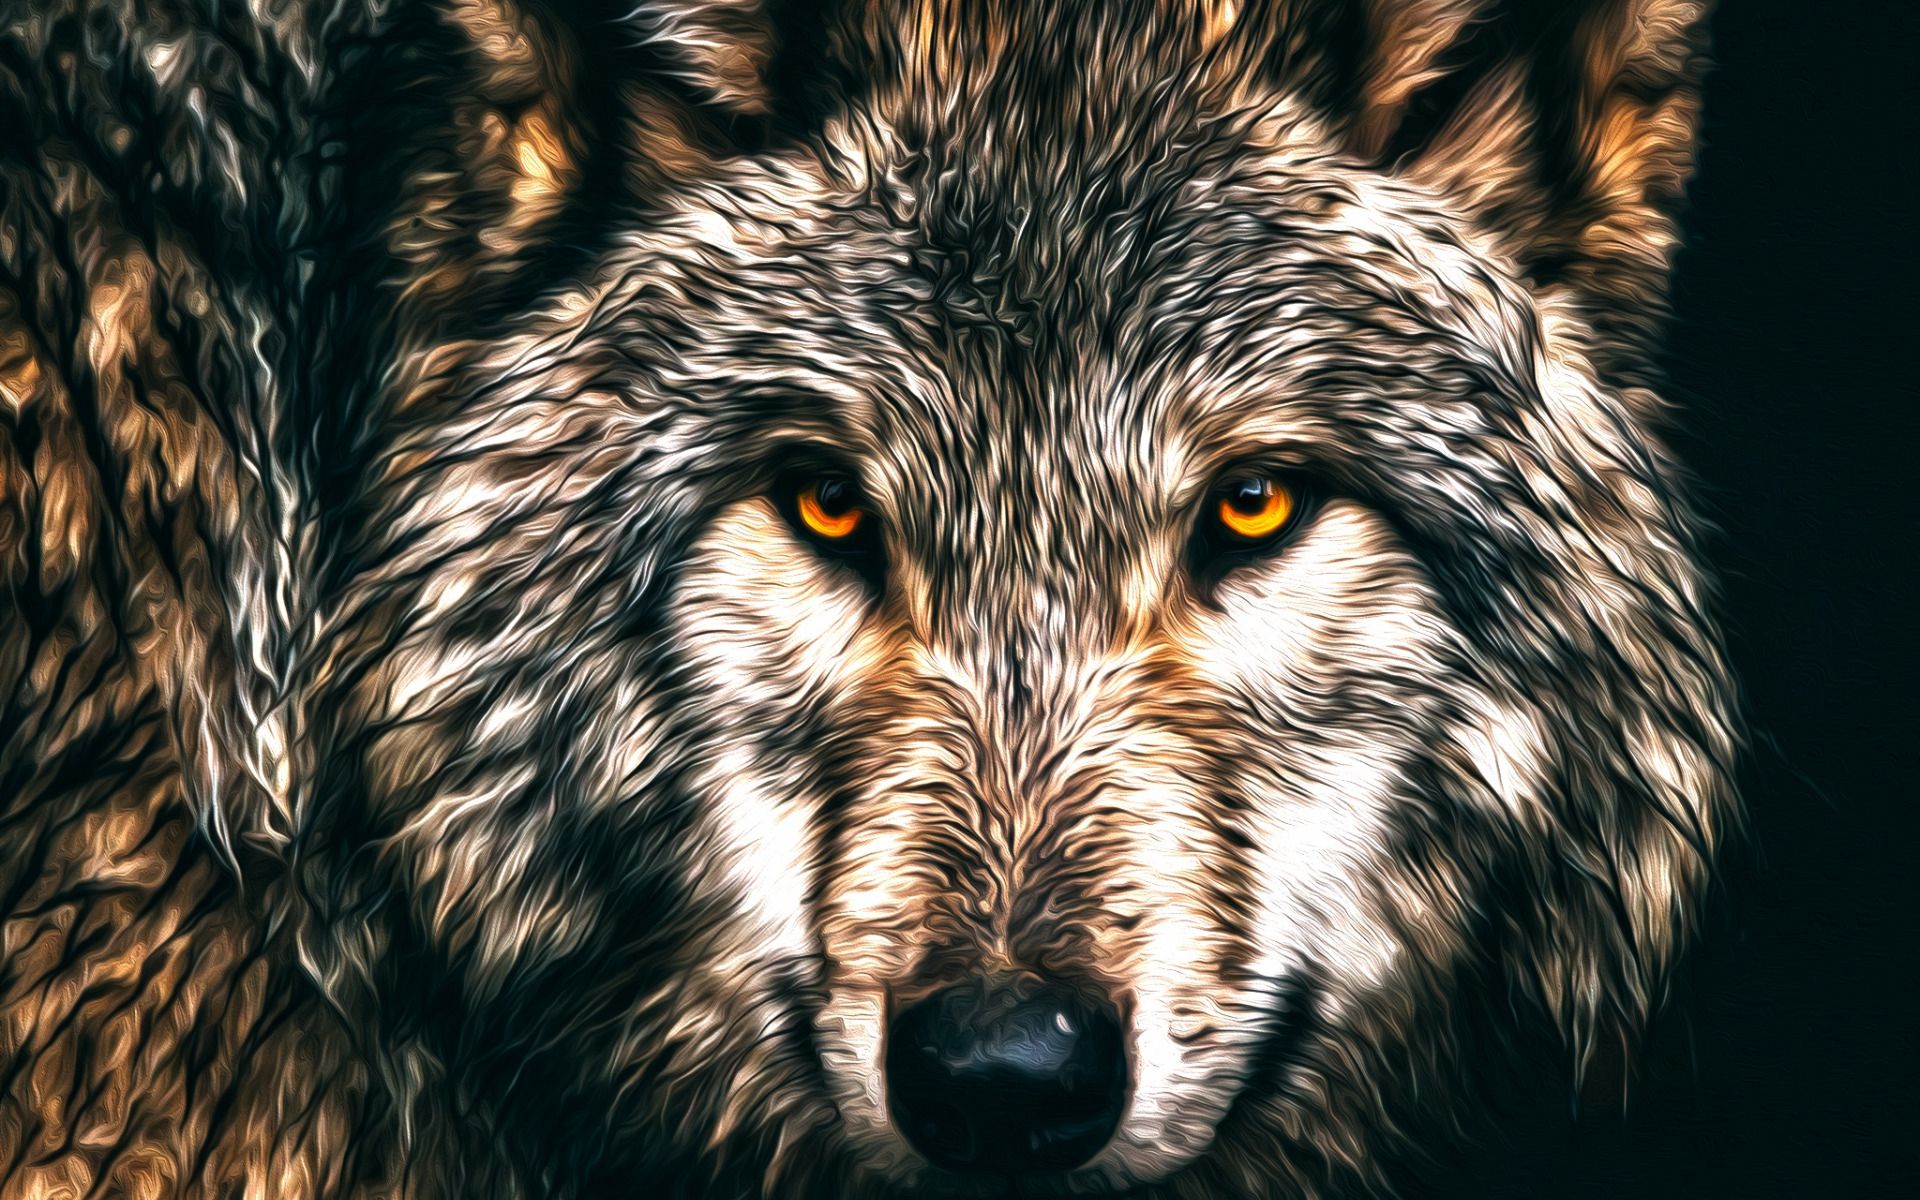 Download wallpaper wolf, predator, art, painted wolf, forest animals, wild animals for desktop with resolution 1920x1200. High Quality HD picture wallpaper